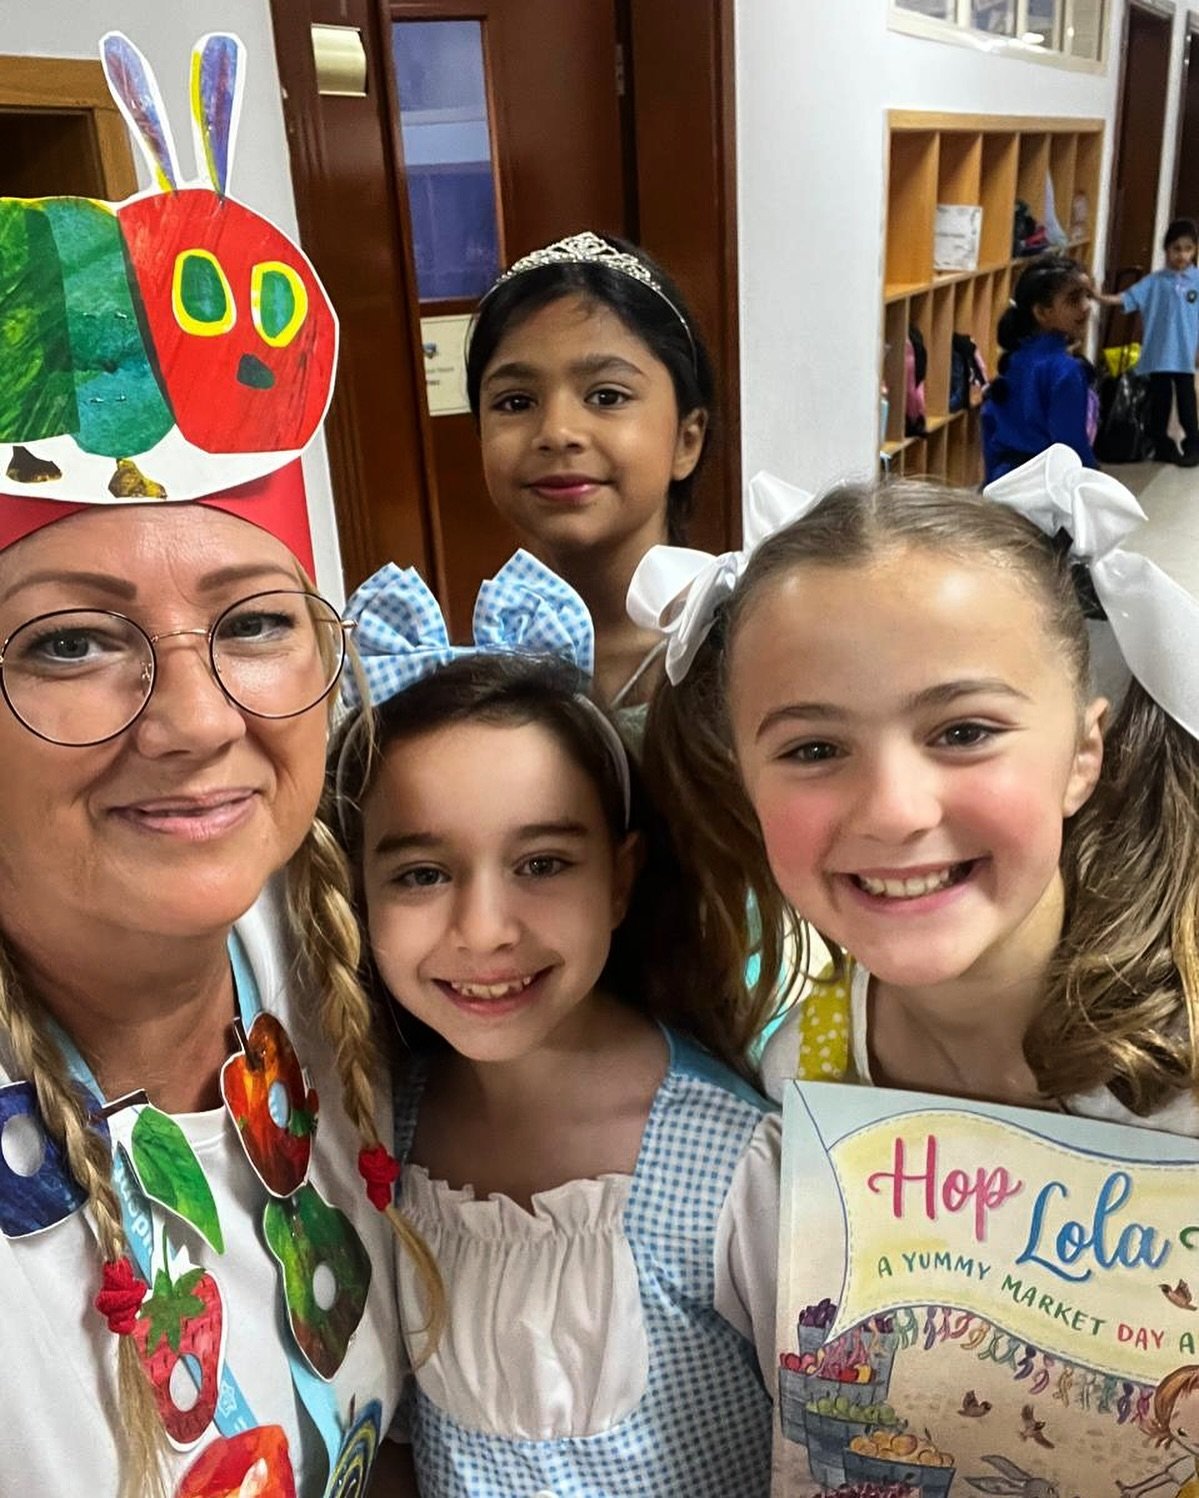 ✨It&rsquo;s Ella!!! ✨ What a lovely surprise spotting Lola&rsquo;s friend during last week&rsquo;s #worldbookday celebrations at RAK Academy.

It&rsquo;s always heartwarming to see all the efforts teachers, parents and especially our young story love